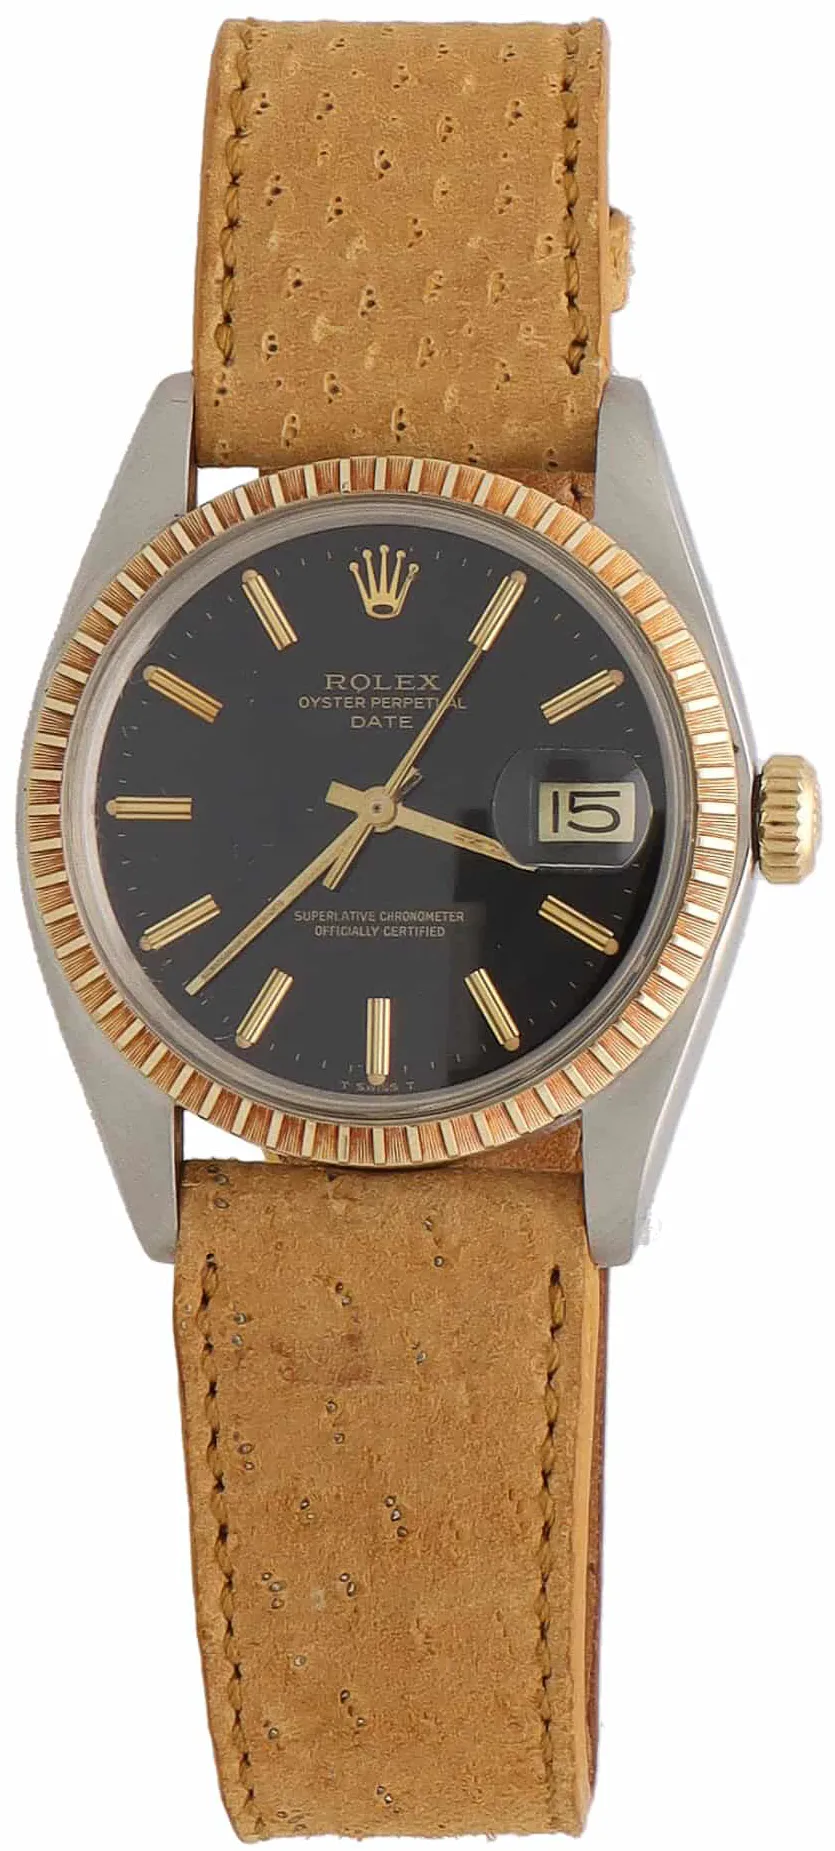 Rolex Oyster Perpetual Date 1505 34mm Yellow gold and stainless steel Gilt